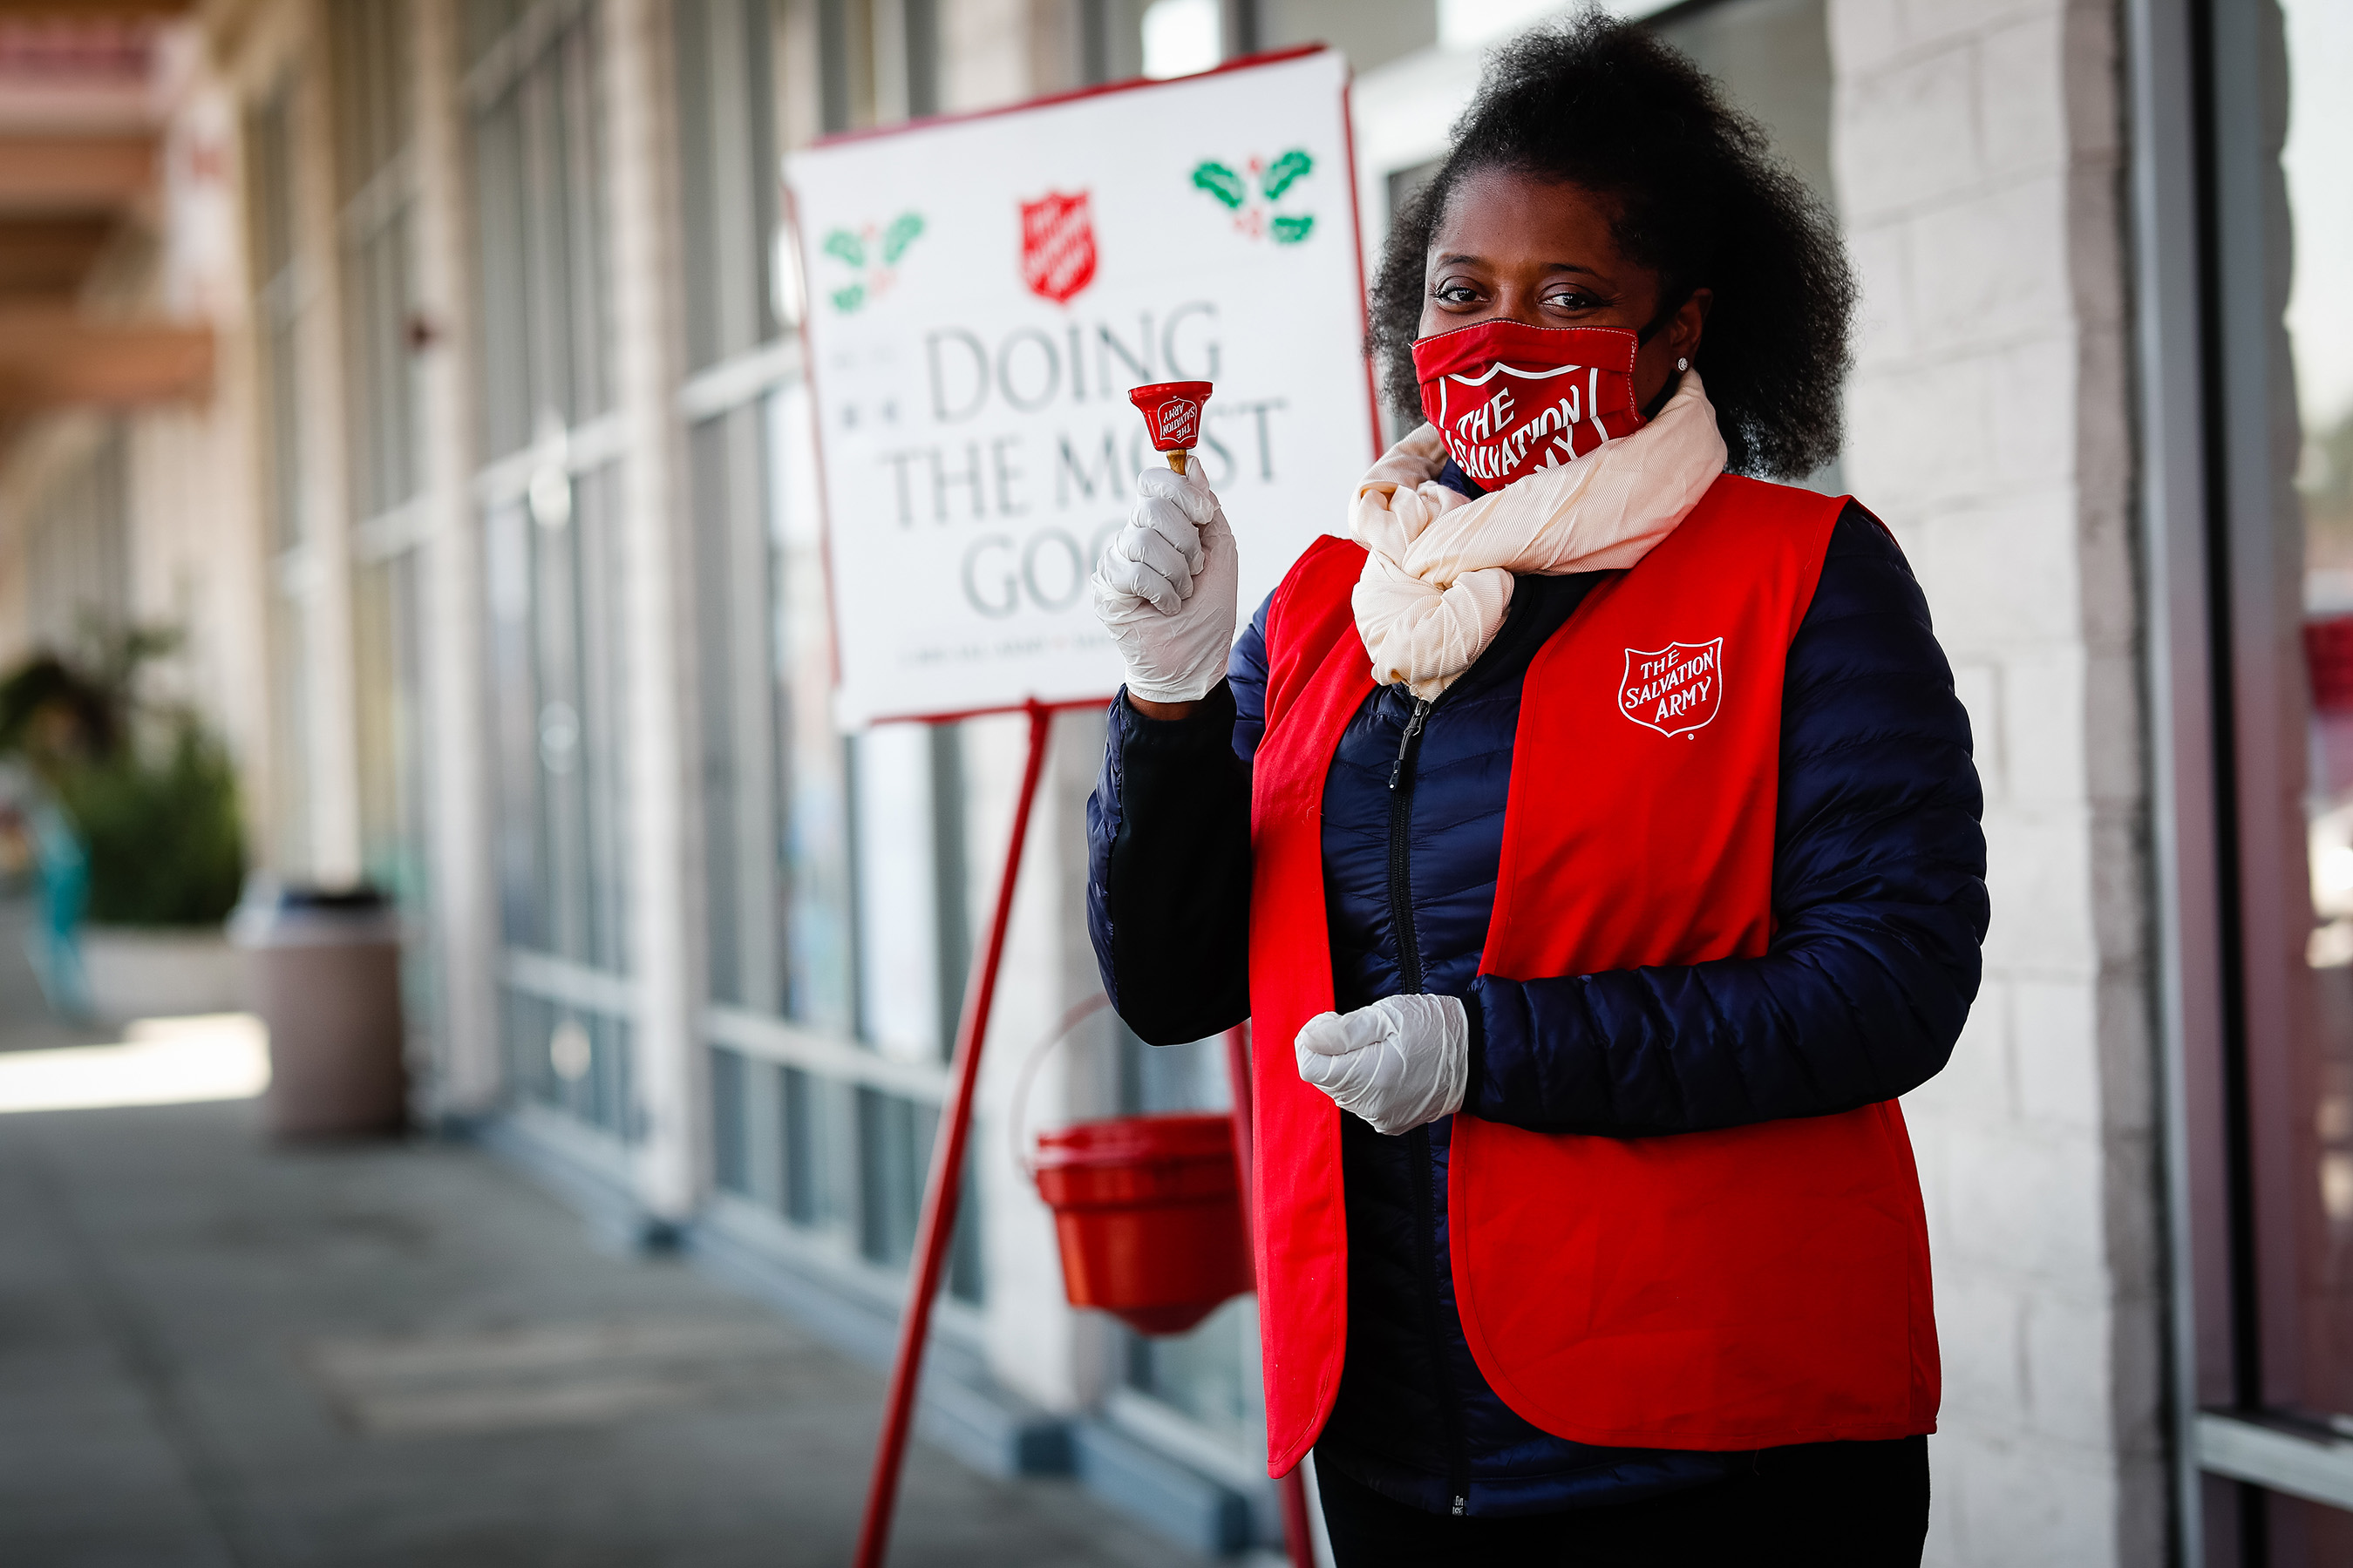 The Salvation Army’s Red Kettles are at risk of raising vital funds this holiday season.